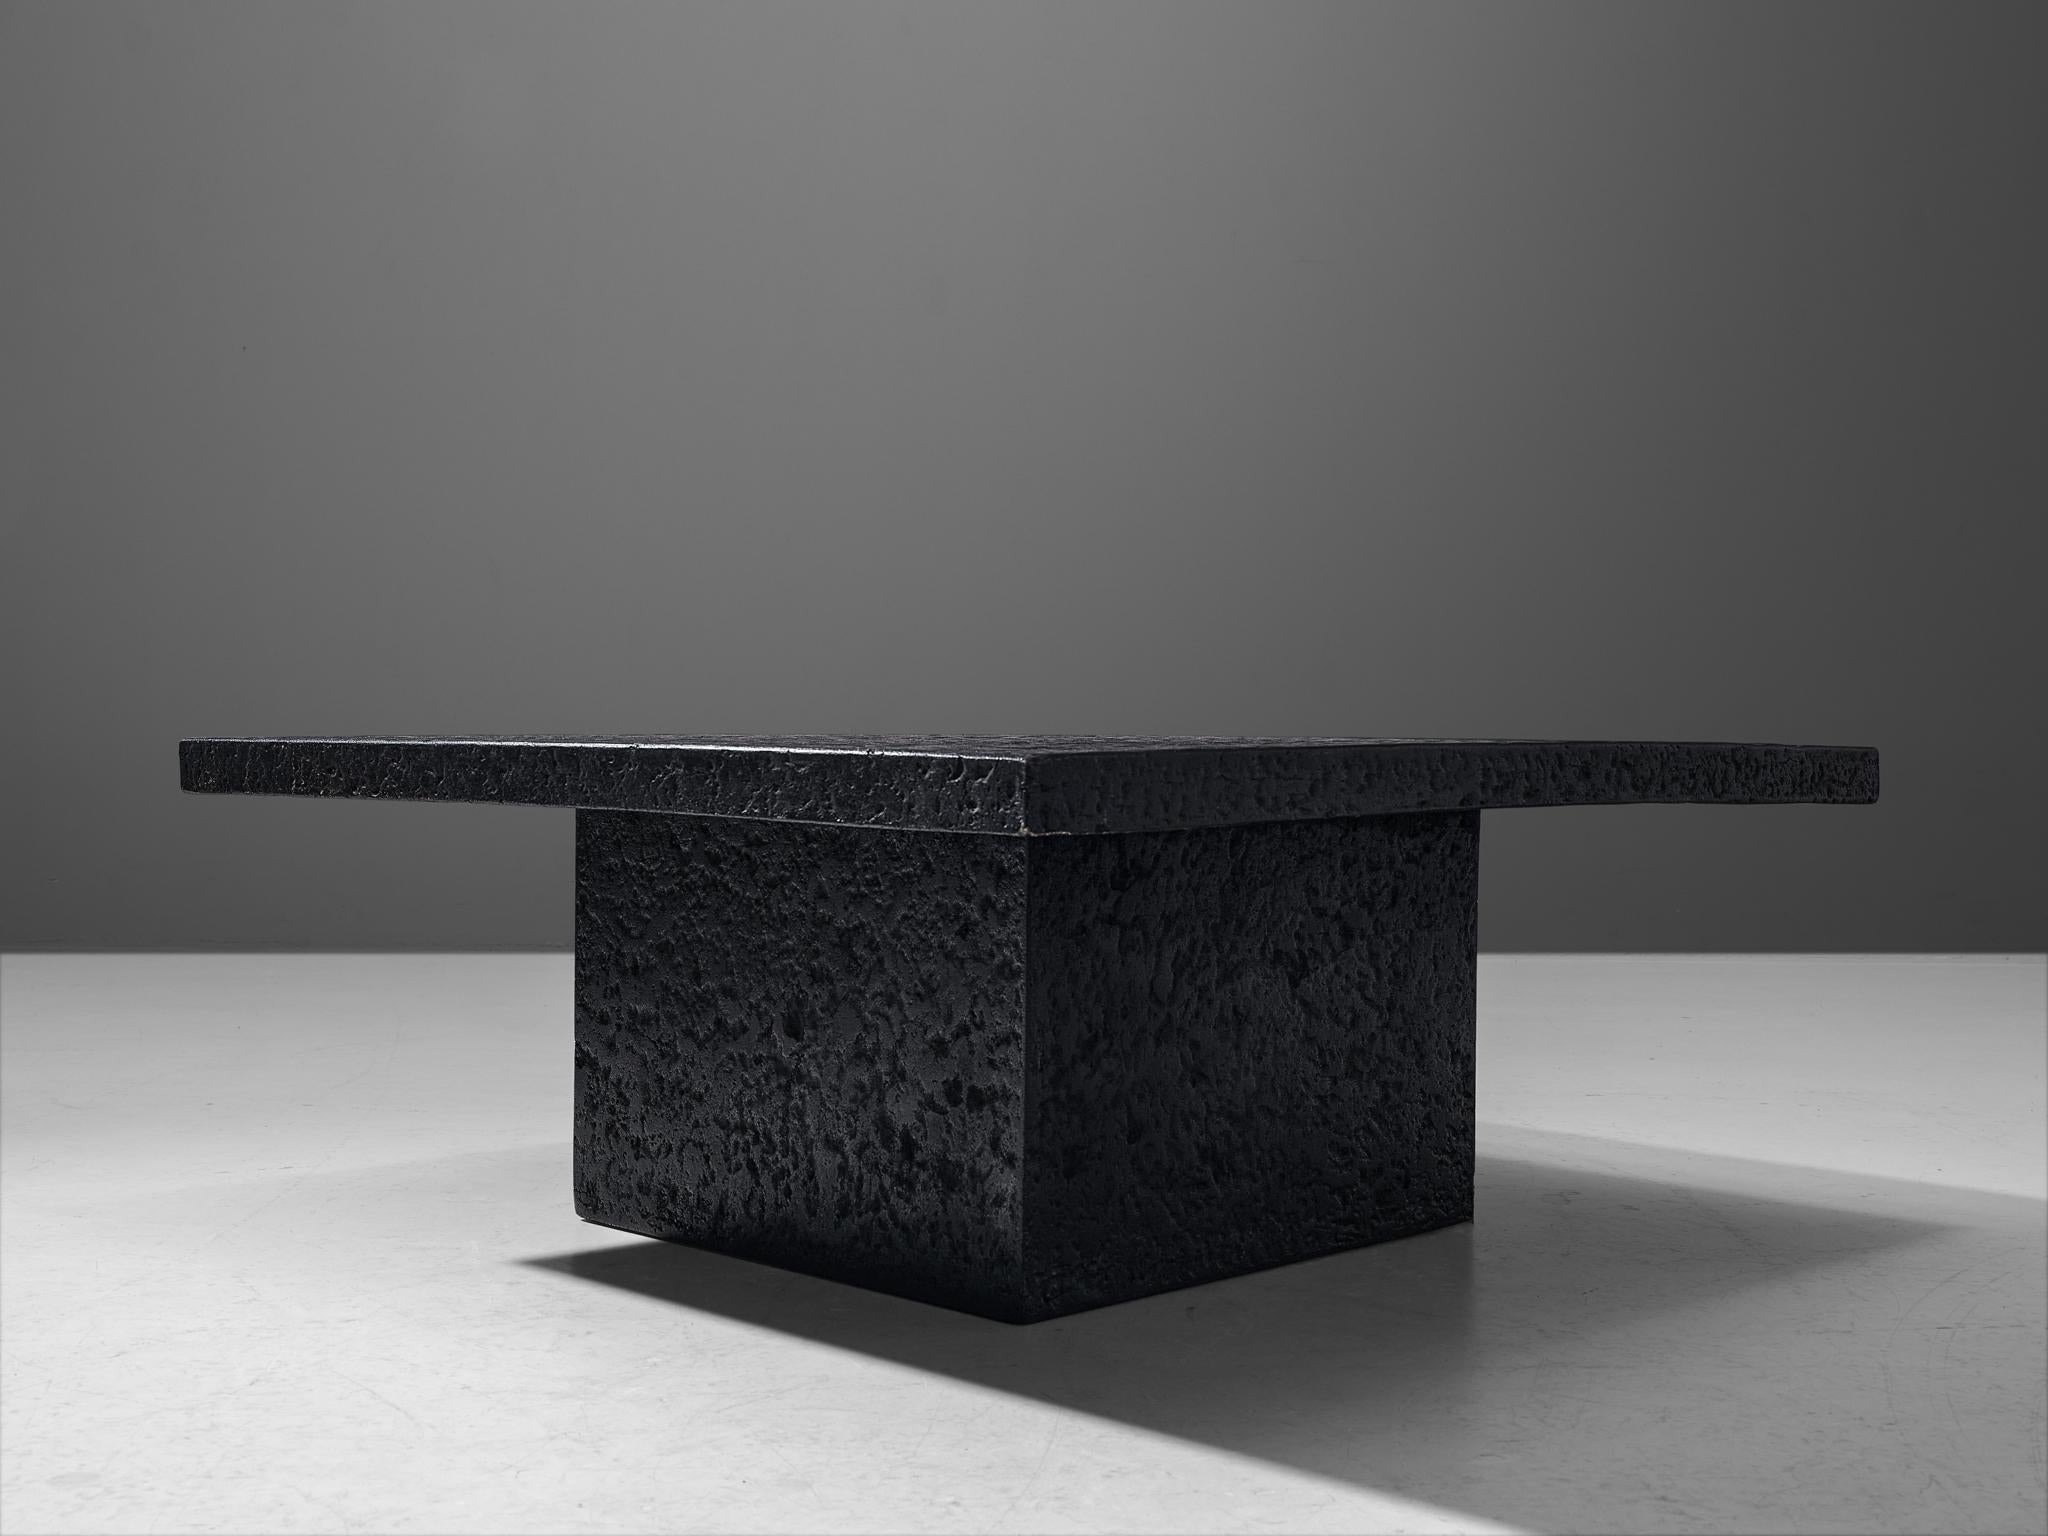 Coffee table, resin, Northern-Europe, 1970s.

This deep black coffee or cocktail table was made in the 1970s. The thick square top is supported by a cubical base. The whole construction is executed in resin which resembles the appearance of stone.